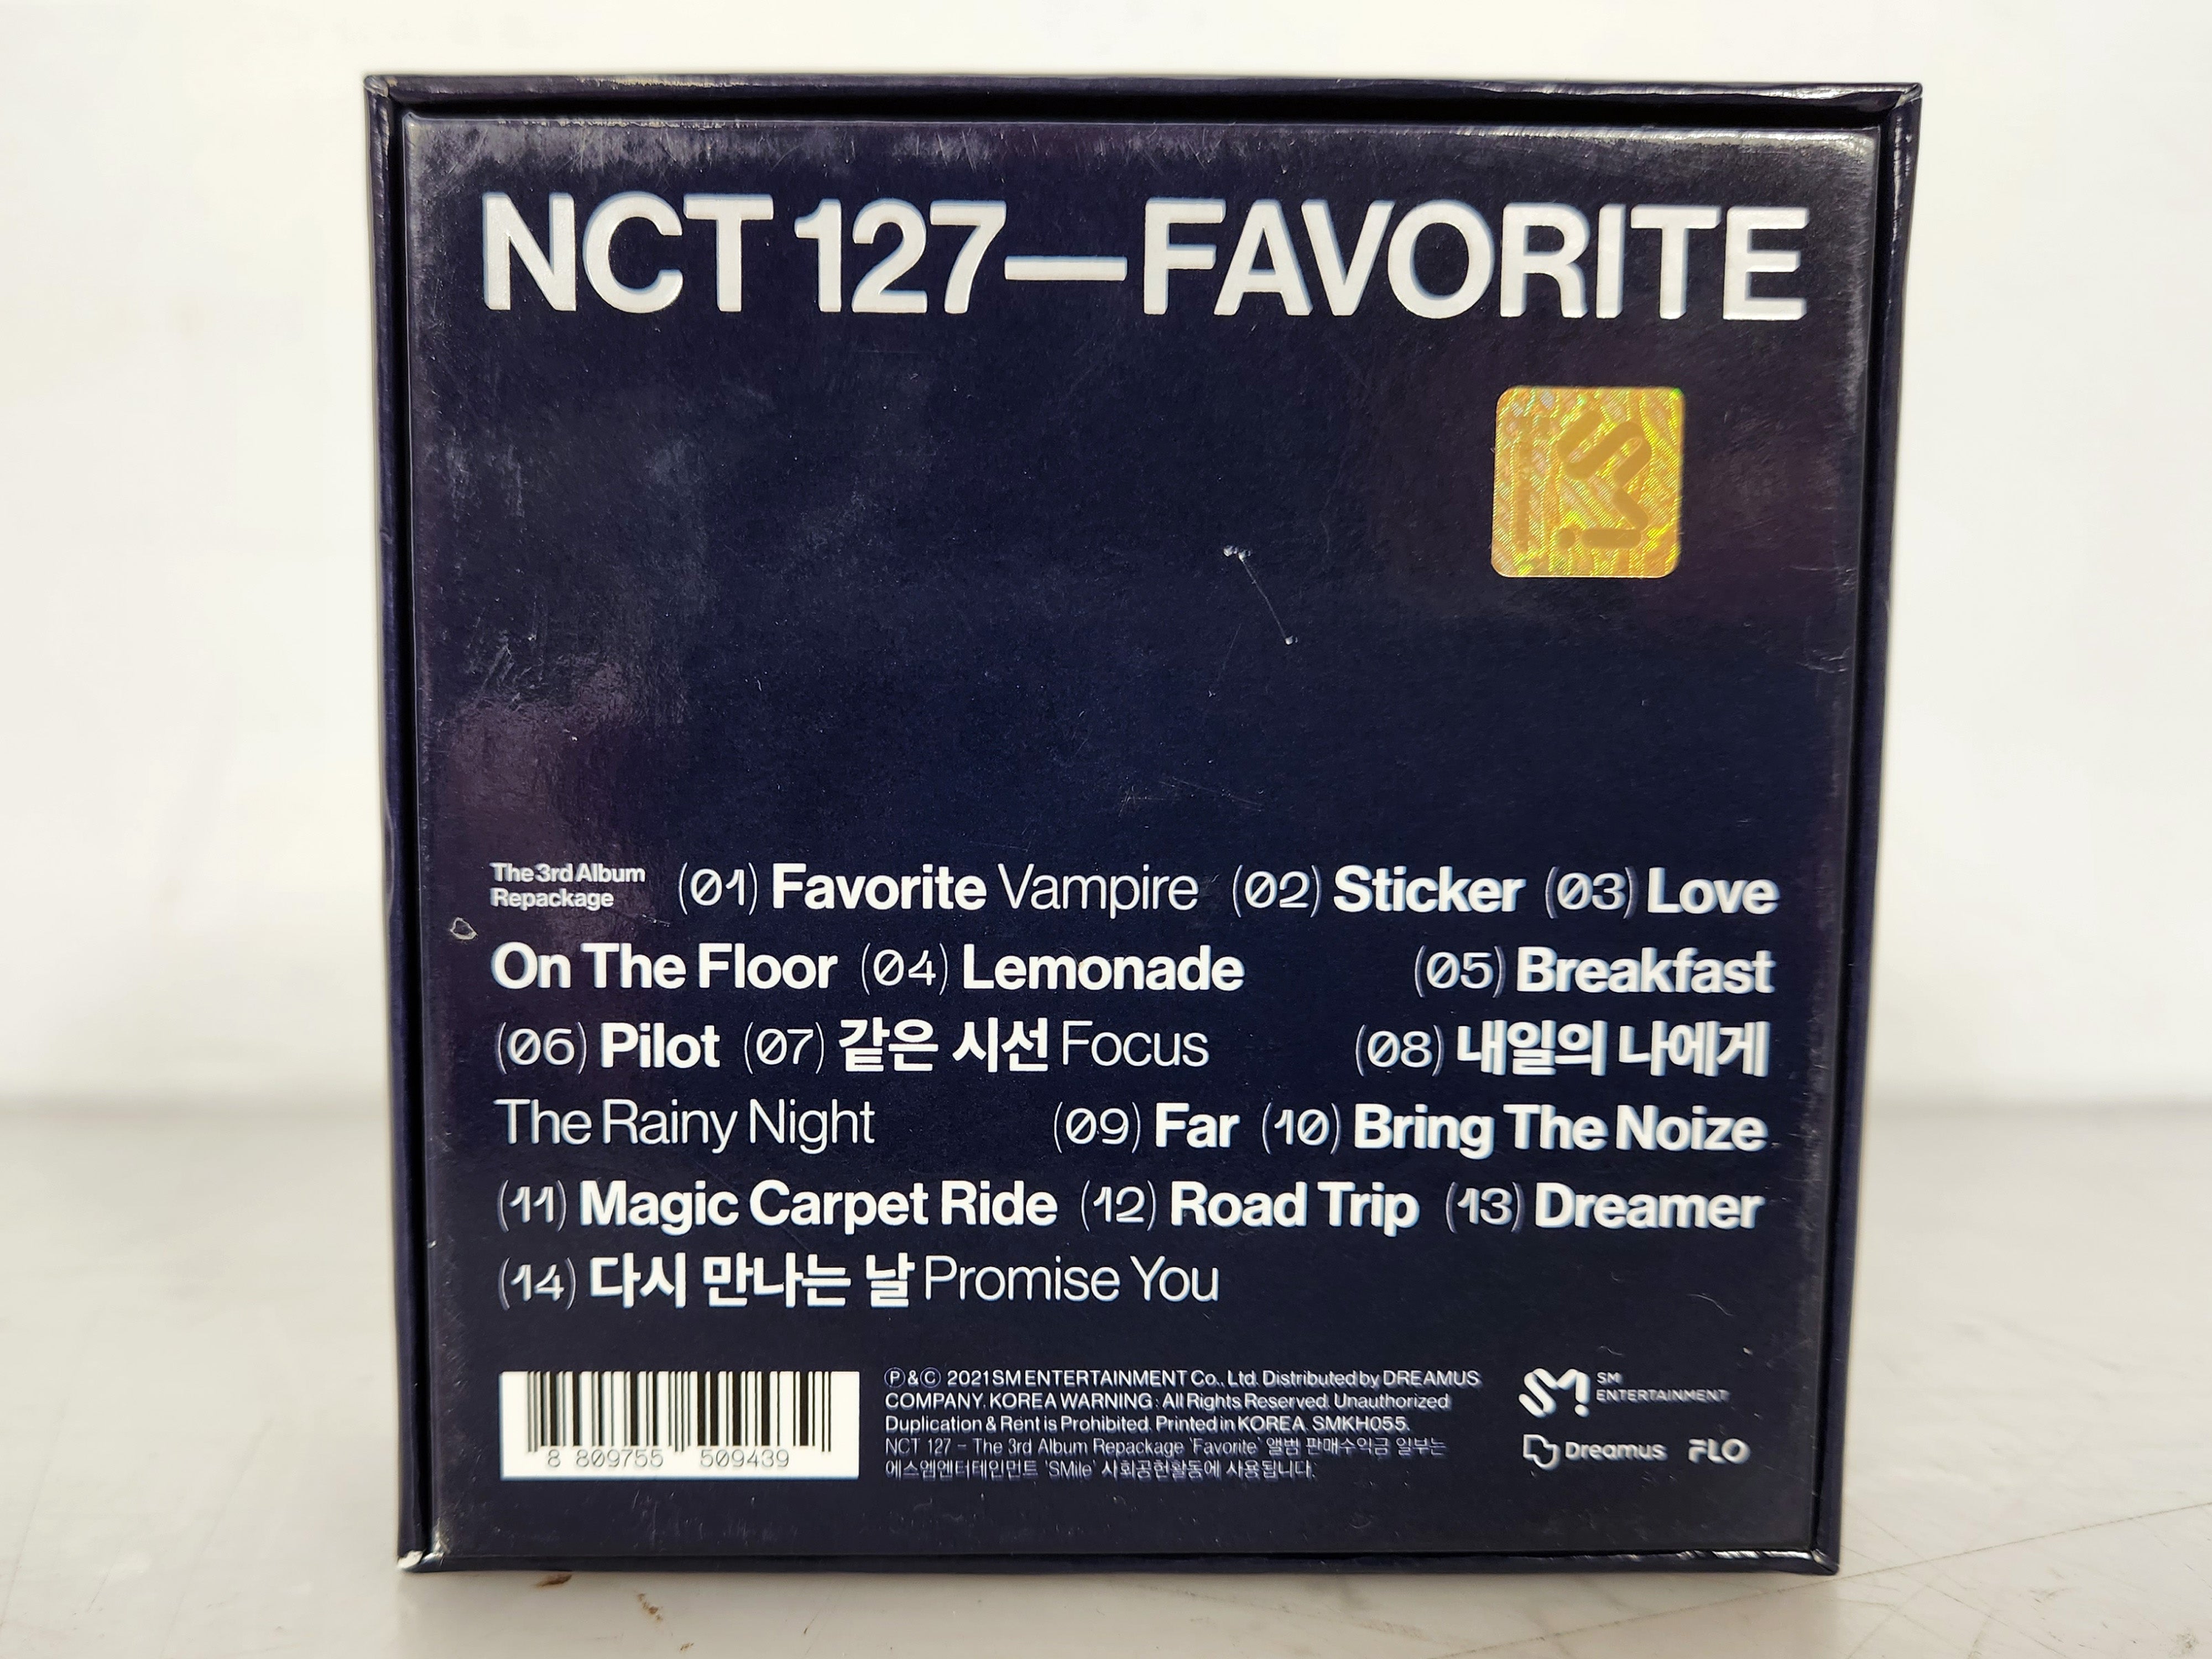 NCT 127 Favorite The 3rd Album Repackage Poetic Version KPOP Kit Album with Folding Photo Insert